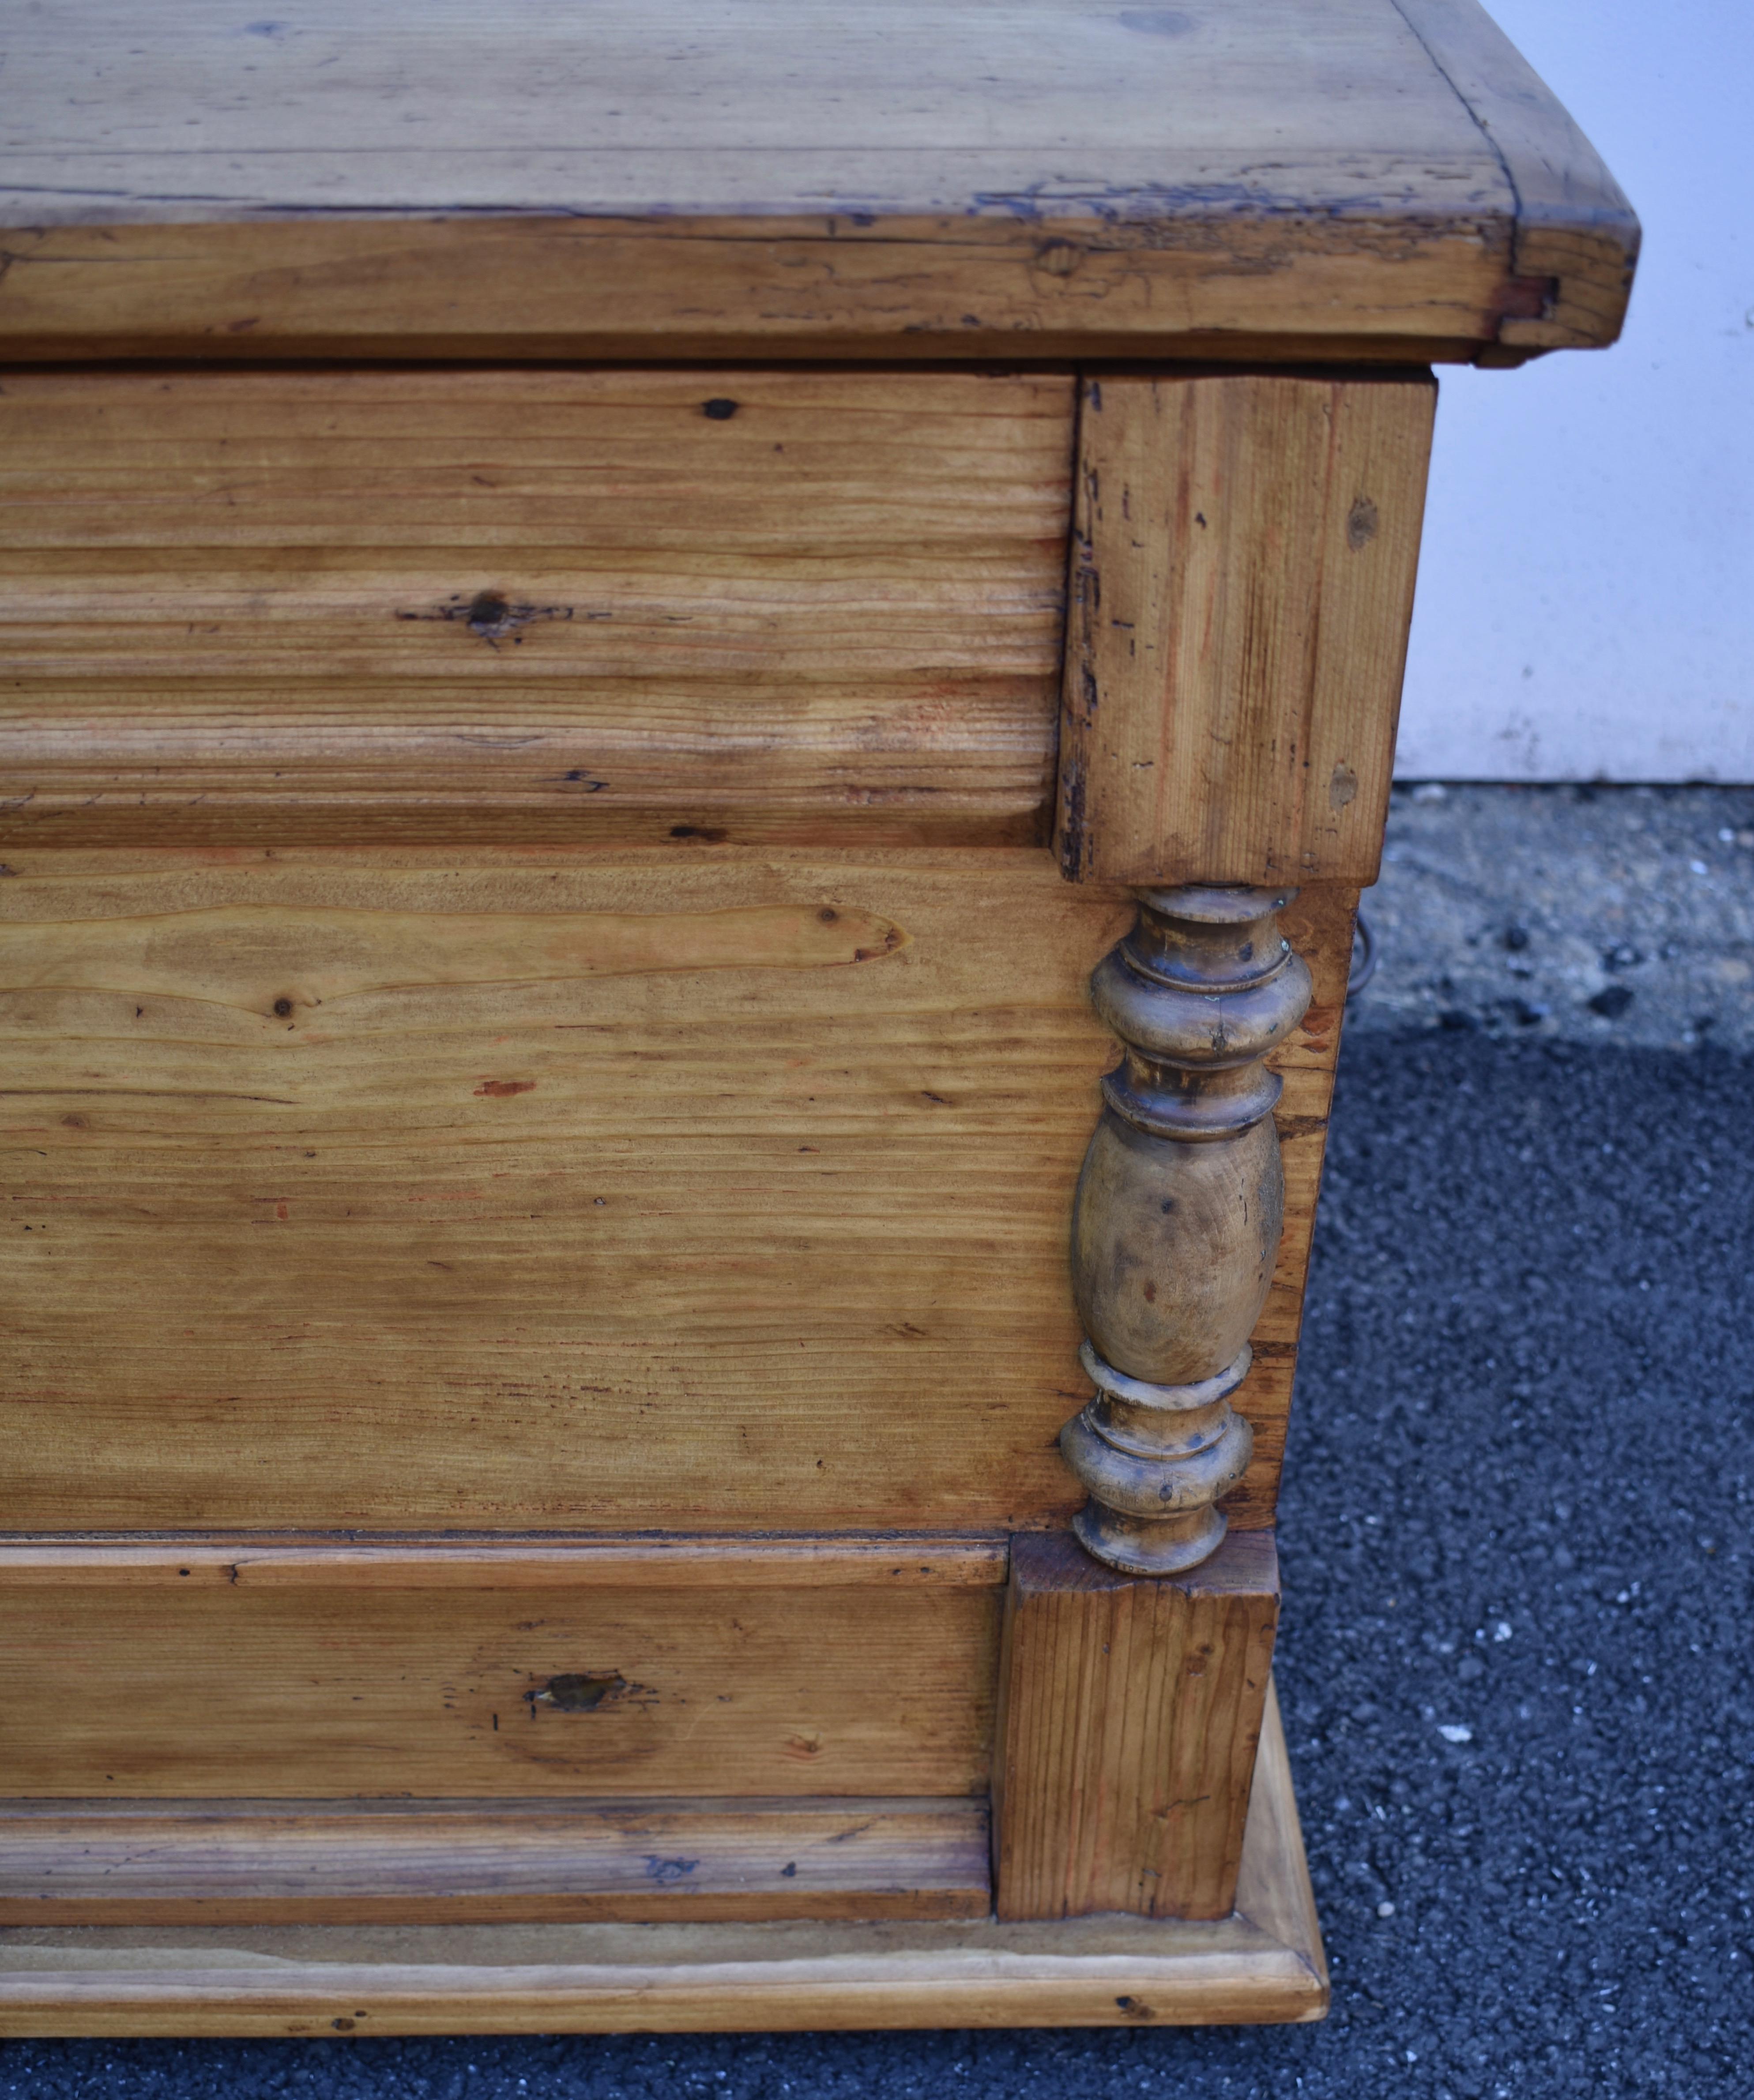 19th Century Pine Trunk or Blanket Chest